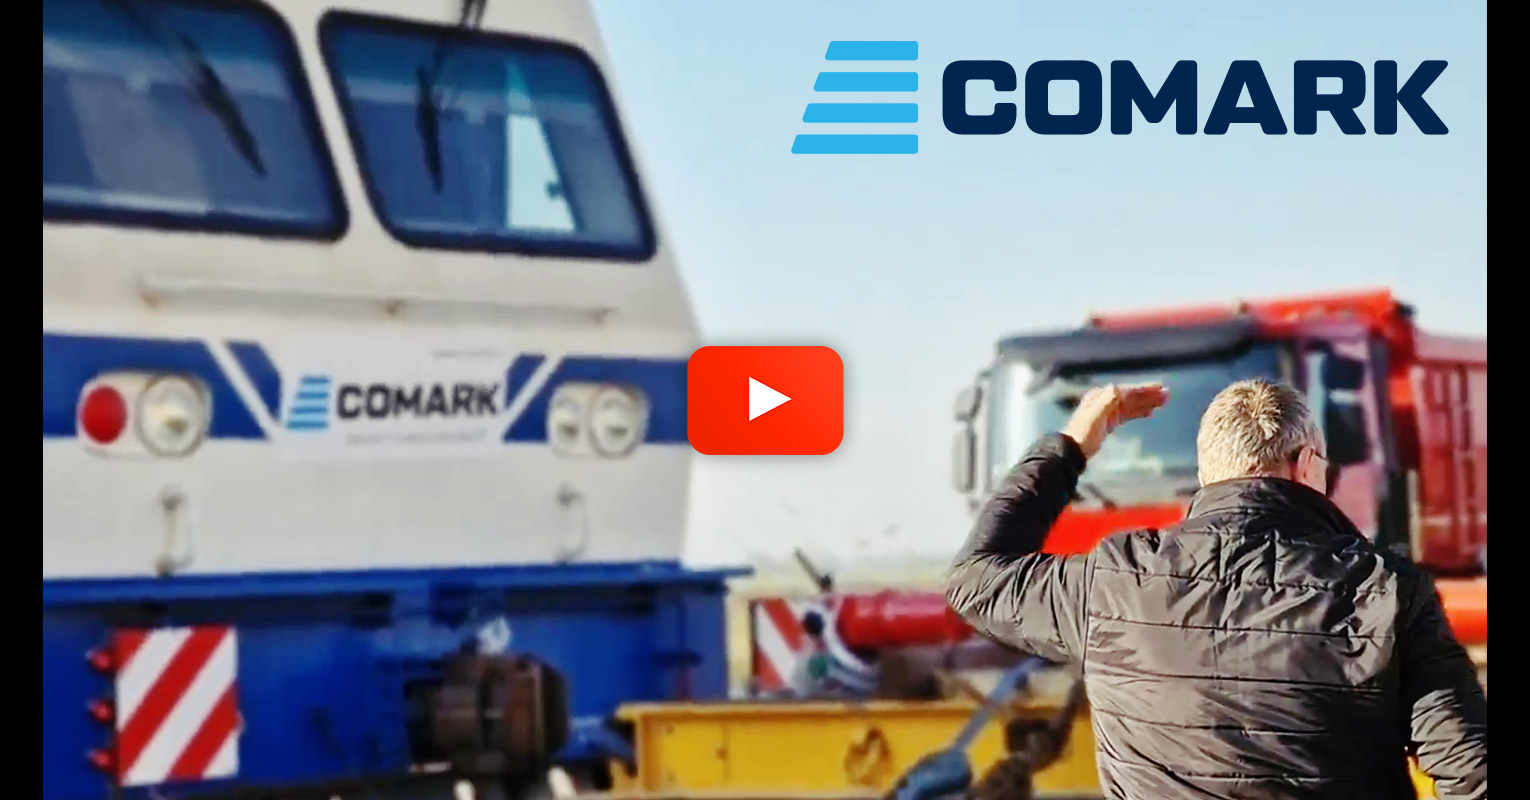 Comark Handling Rail Cars from UAE to Port of Koper (Luka Koper) and then to Serbia